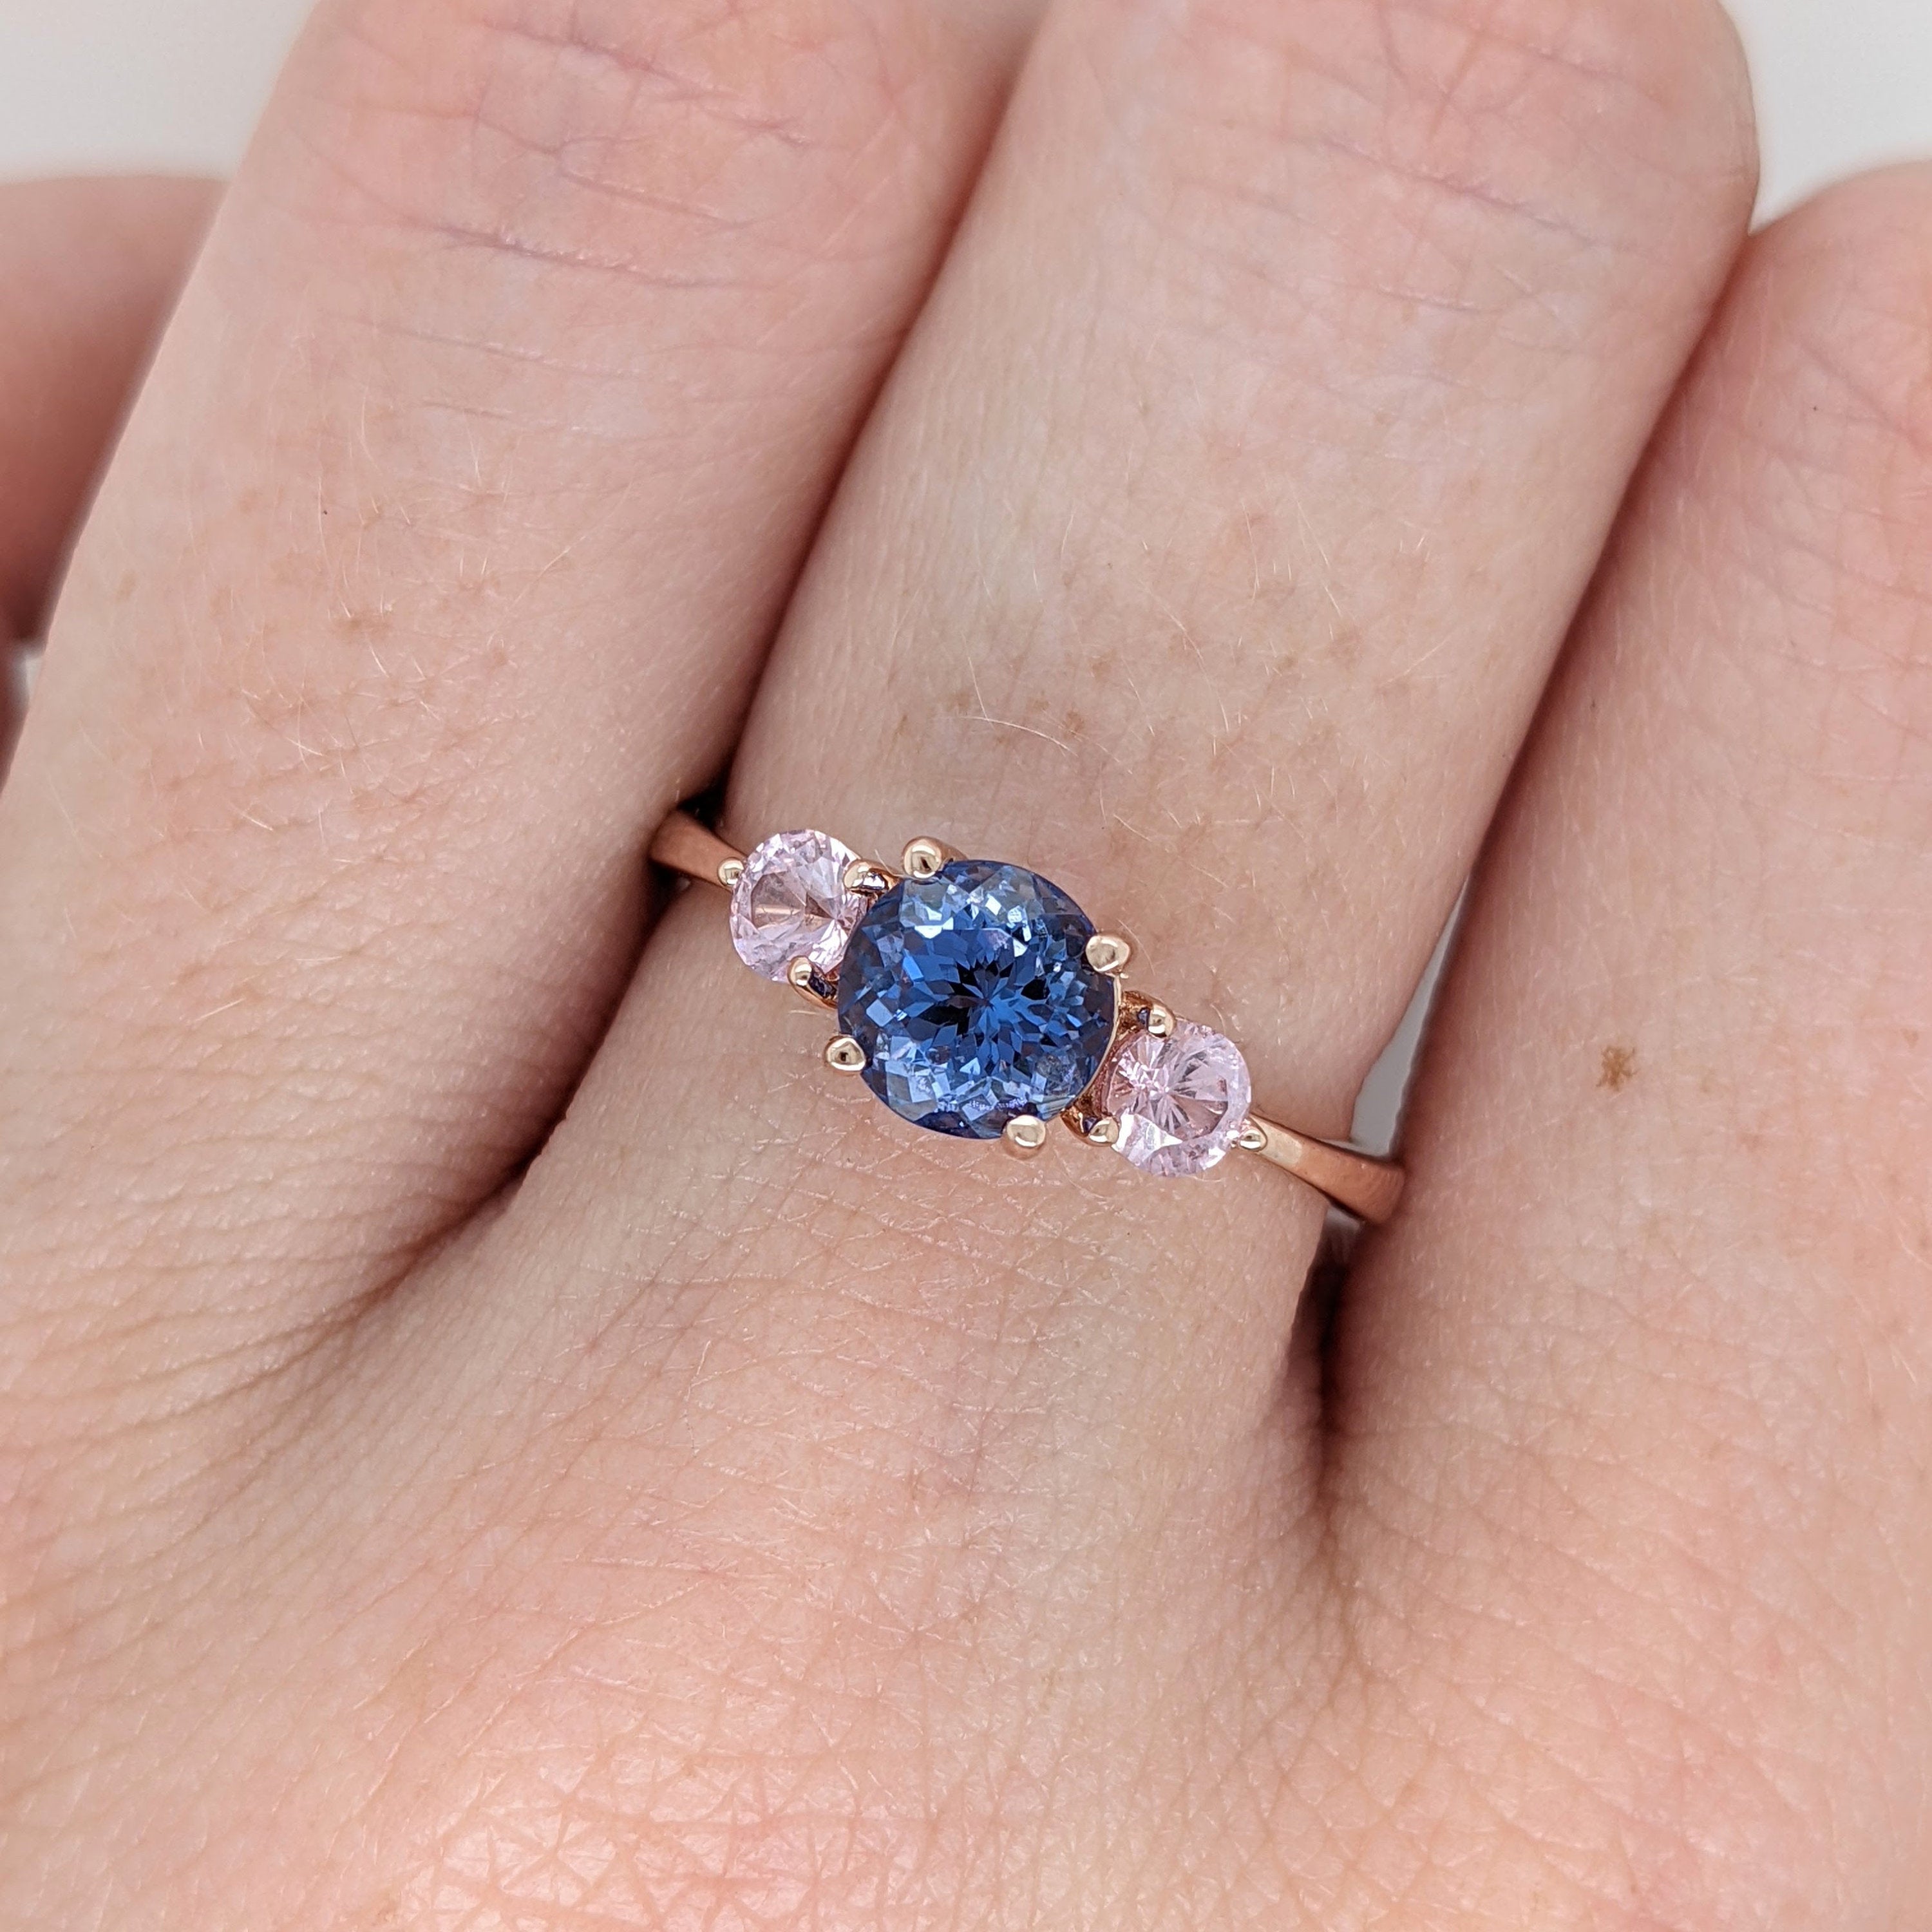 Tanzanite and Pink Sapphire Ring in 14K Rose Gold | Three Stone Ring | Round 6mm | Blue and Pink Natural Gemstones | One of a Kind | For Her